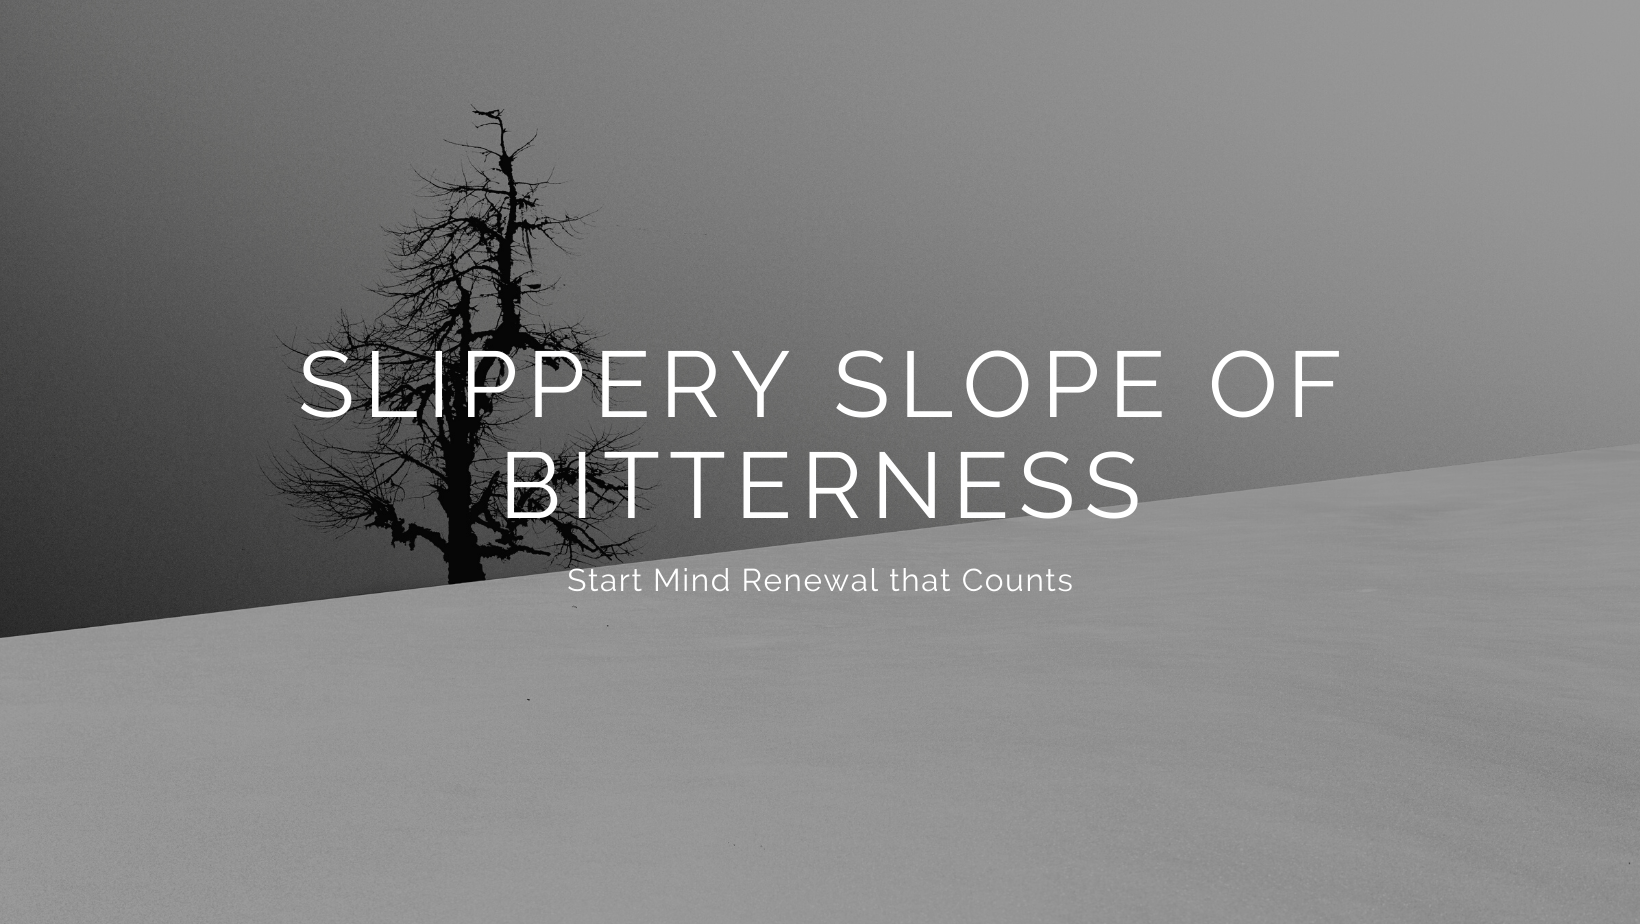 28. The Slippery Slope of Bitterness